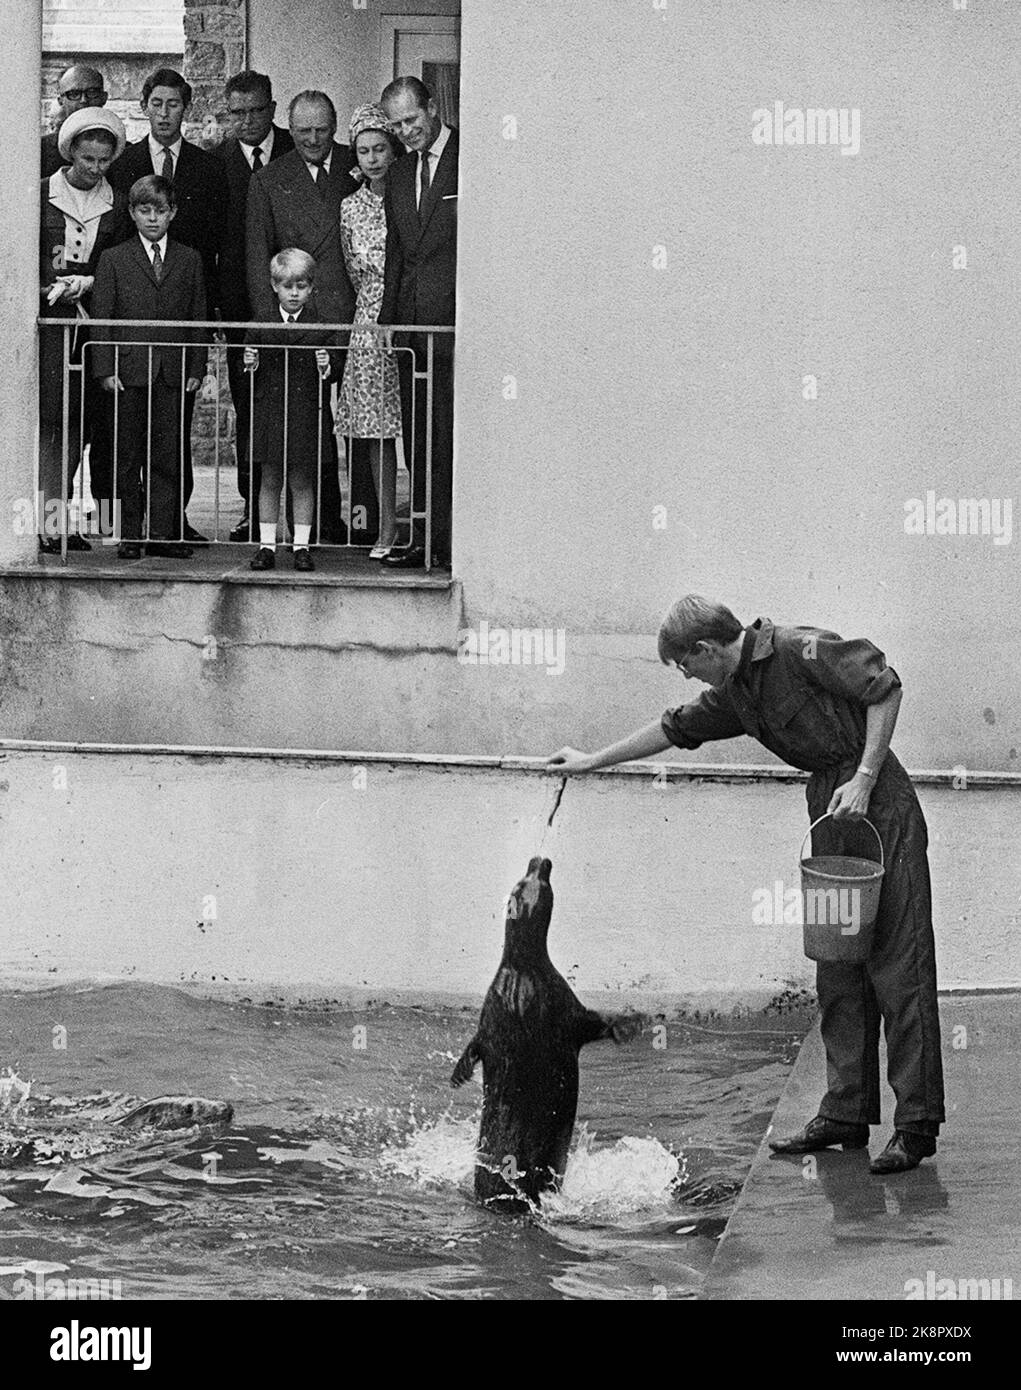 Bergen 19690808. Queen Elizabeth in Norway with the family. The royals visit the aquarium in Bergen. Here we see feeding of seals. Eg. Crown Princess Sonja, Prince Andrew, Prince Edward, Prince Charles, King Olav, Queen Elizabeth and Prince Philip. Ntb archive / ntb Stock Photo